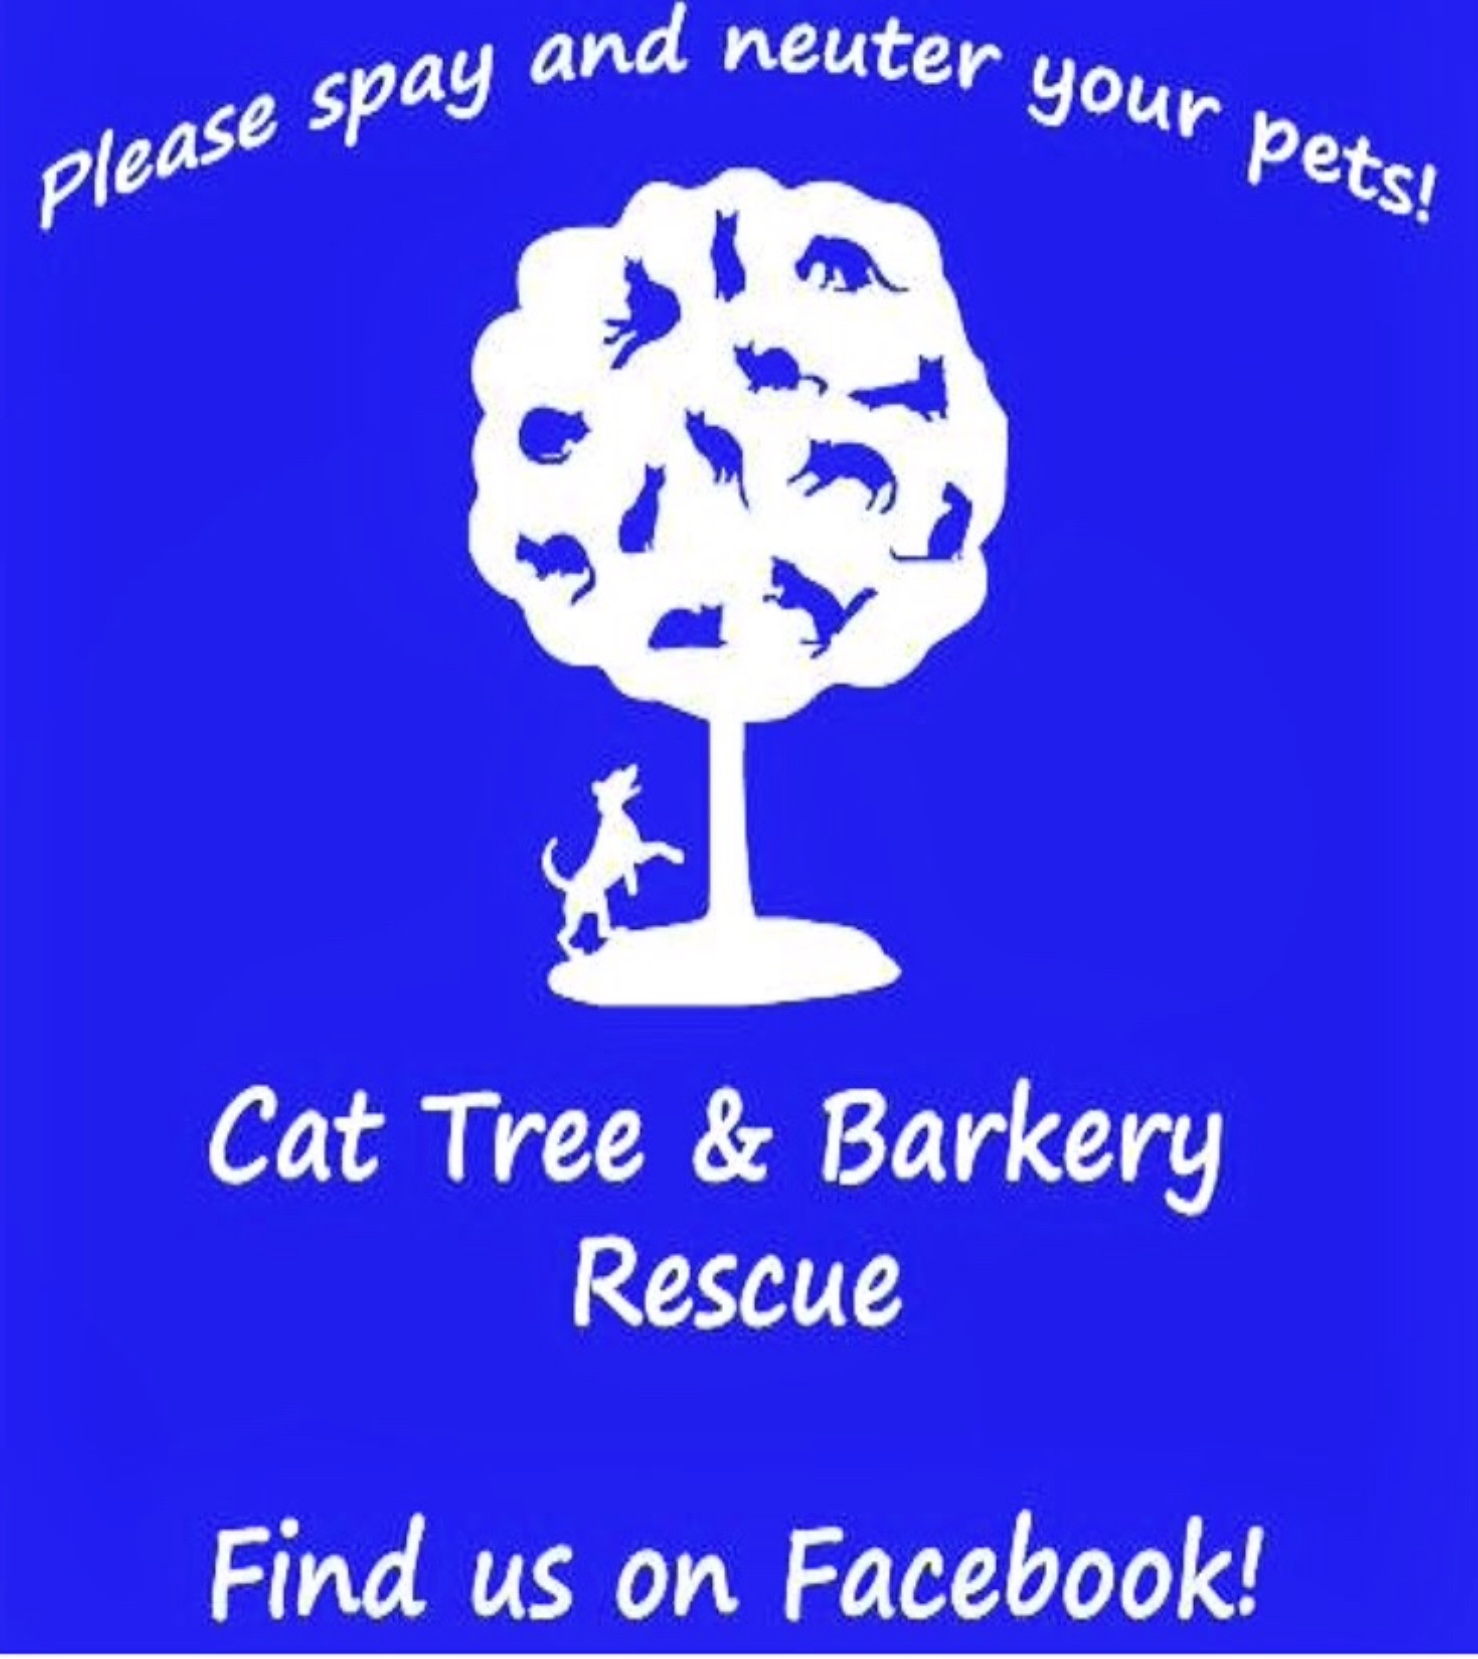 Cat Tree and Barkery Rescue